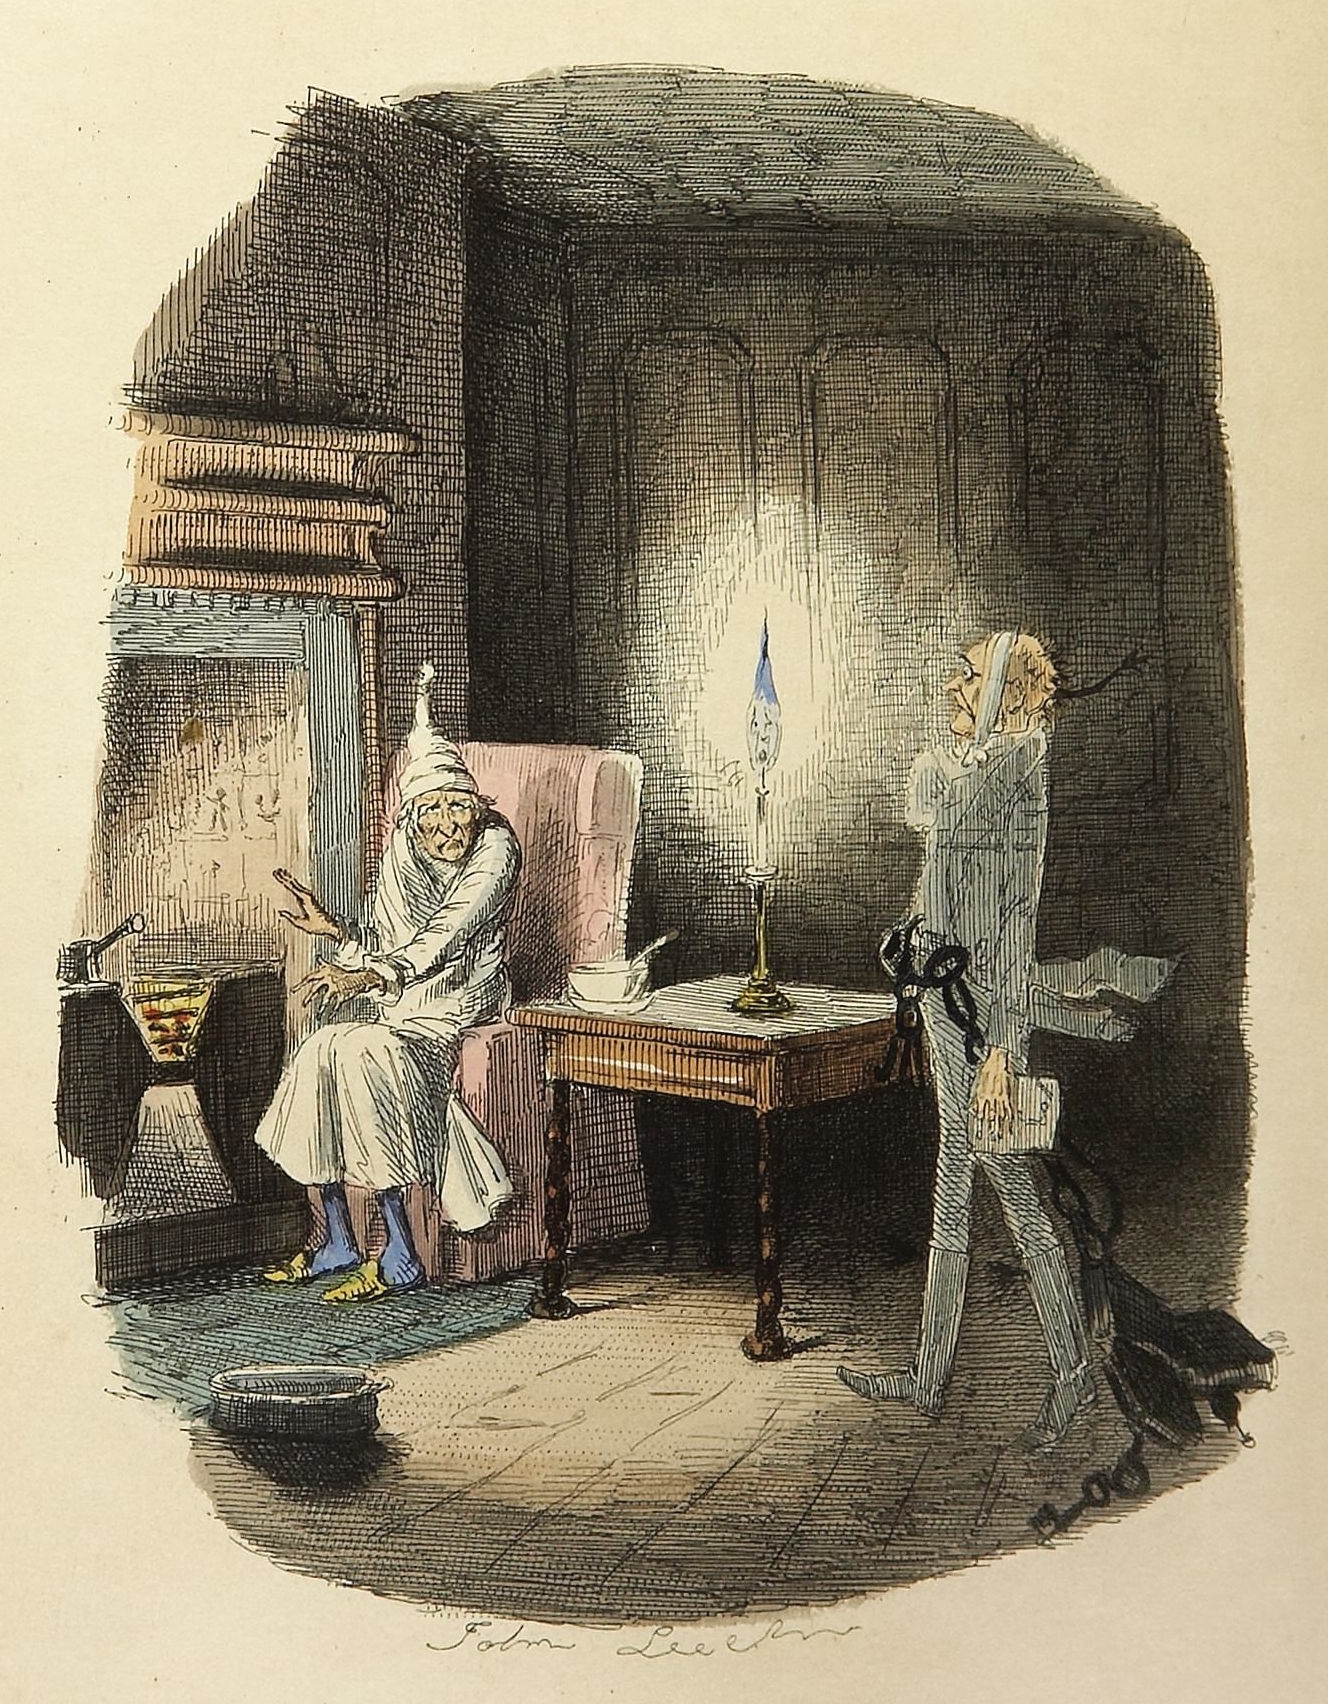 Illustration of Marley and Scrooge in the first edition of A Christmas Carol